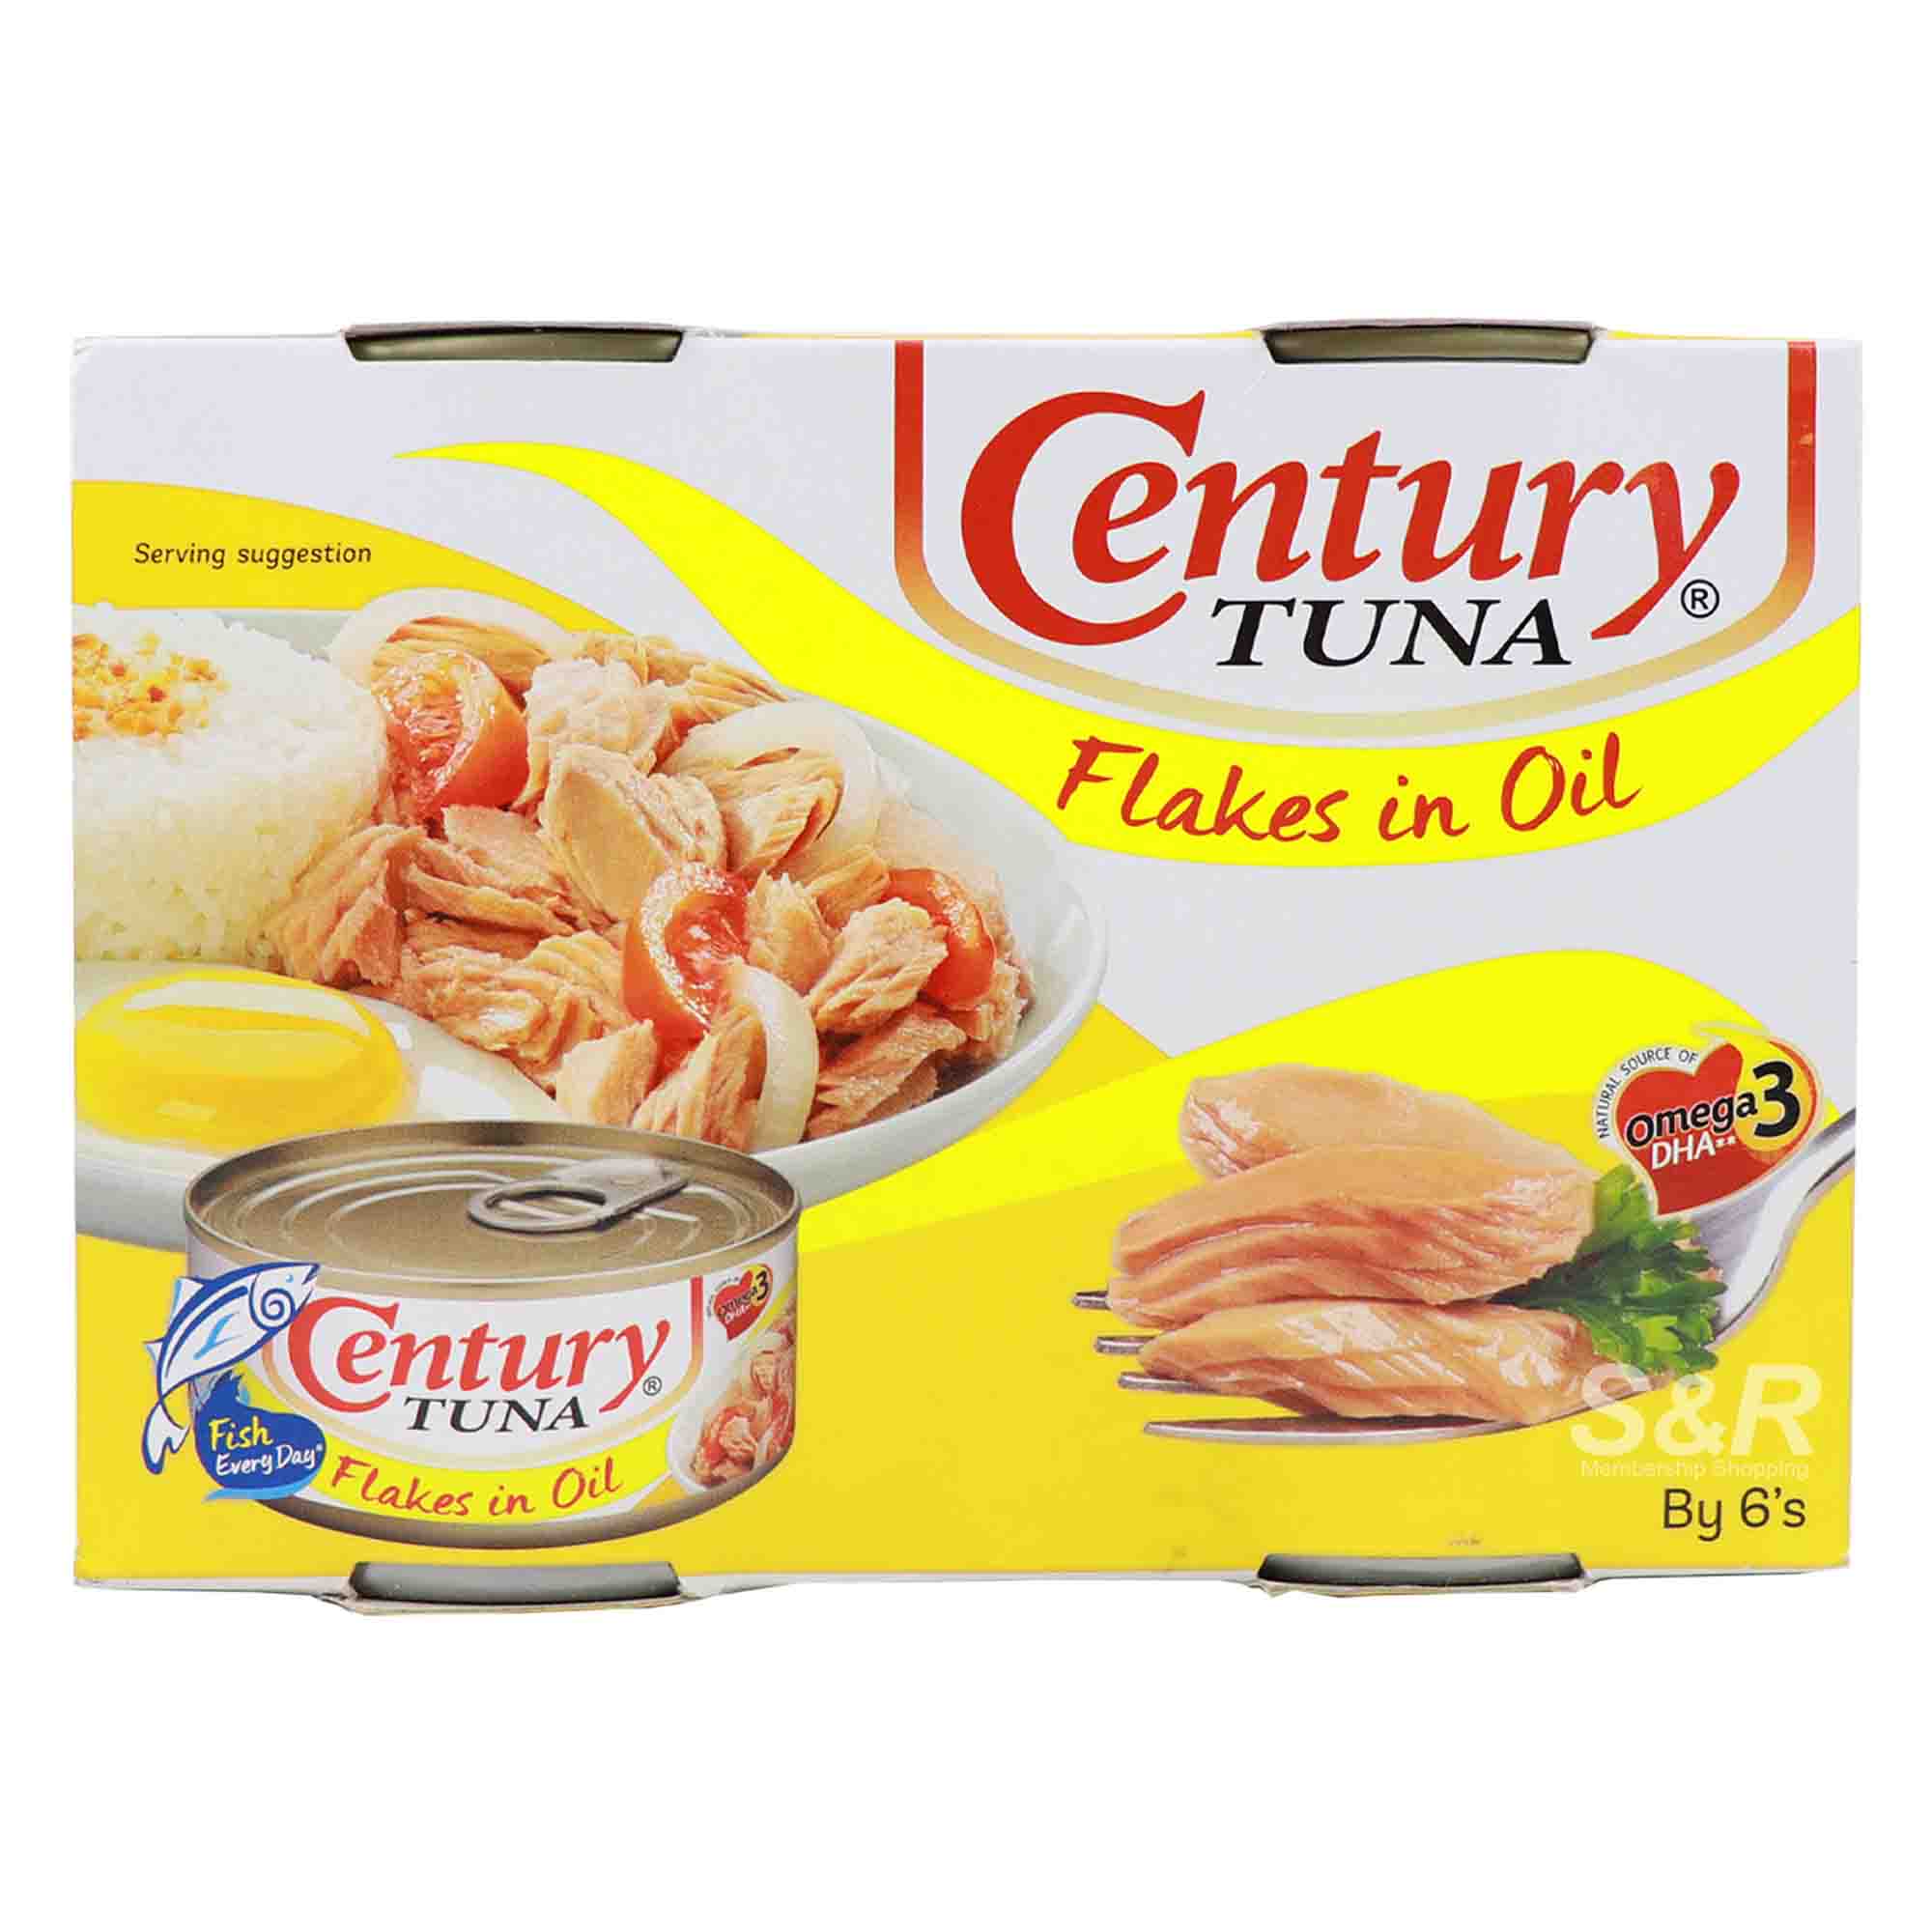 Century Tuna Flakes in Oil 6 cans